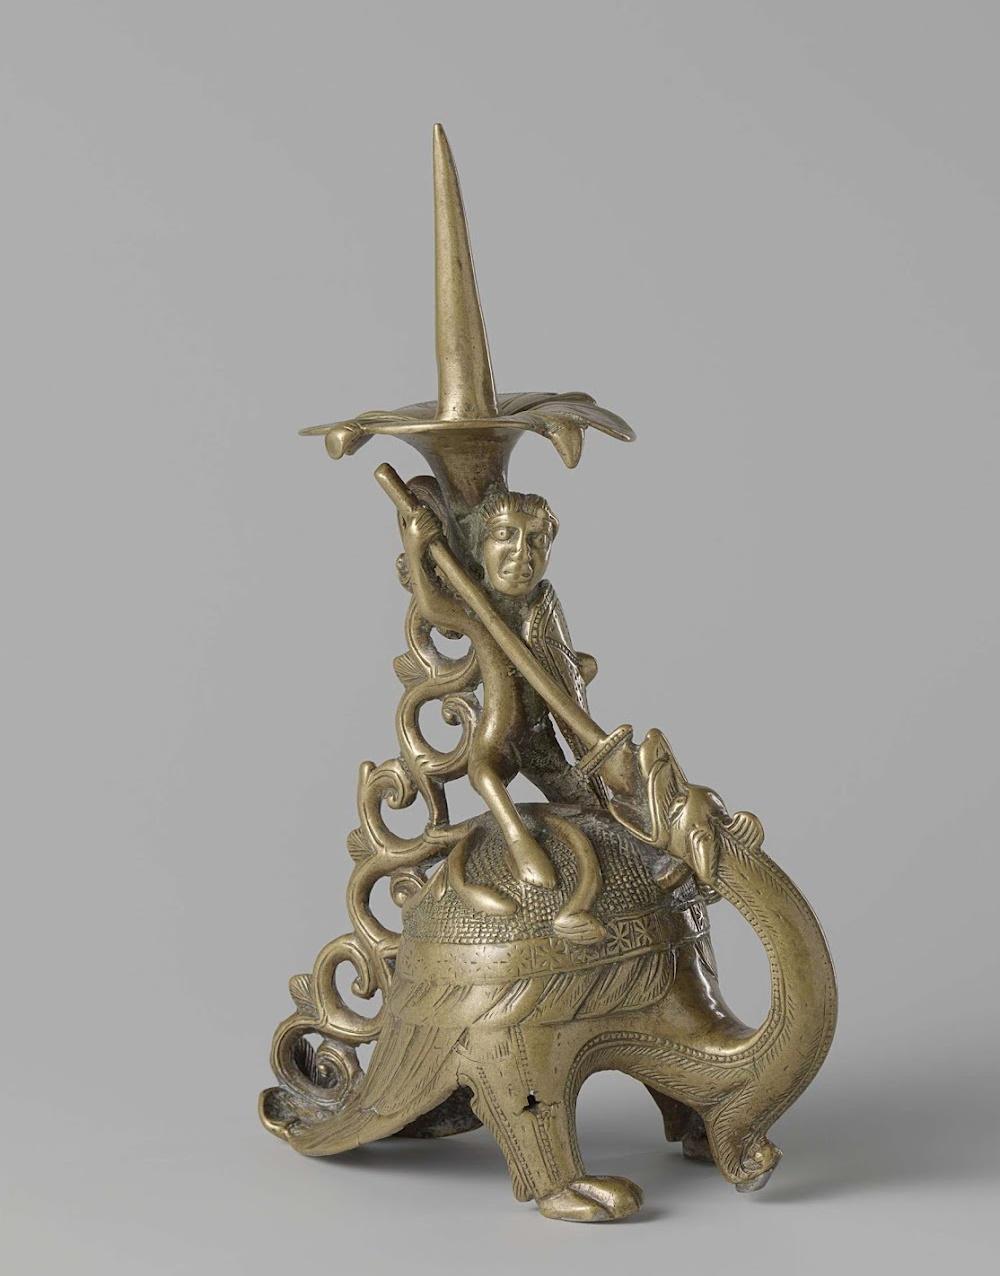 Candlestick [copper alloy]; Knight with a Dragon. Lower Saxony, 1175 - 1225 CE ca. Rijksmuseum.jpg